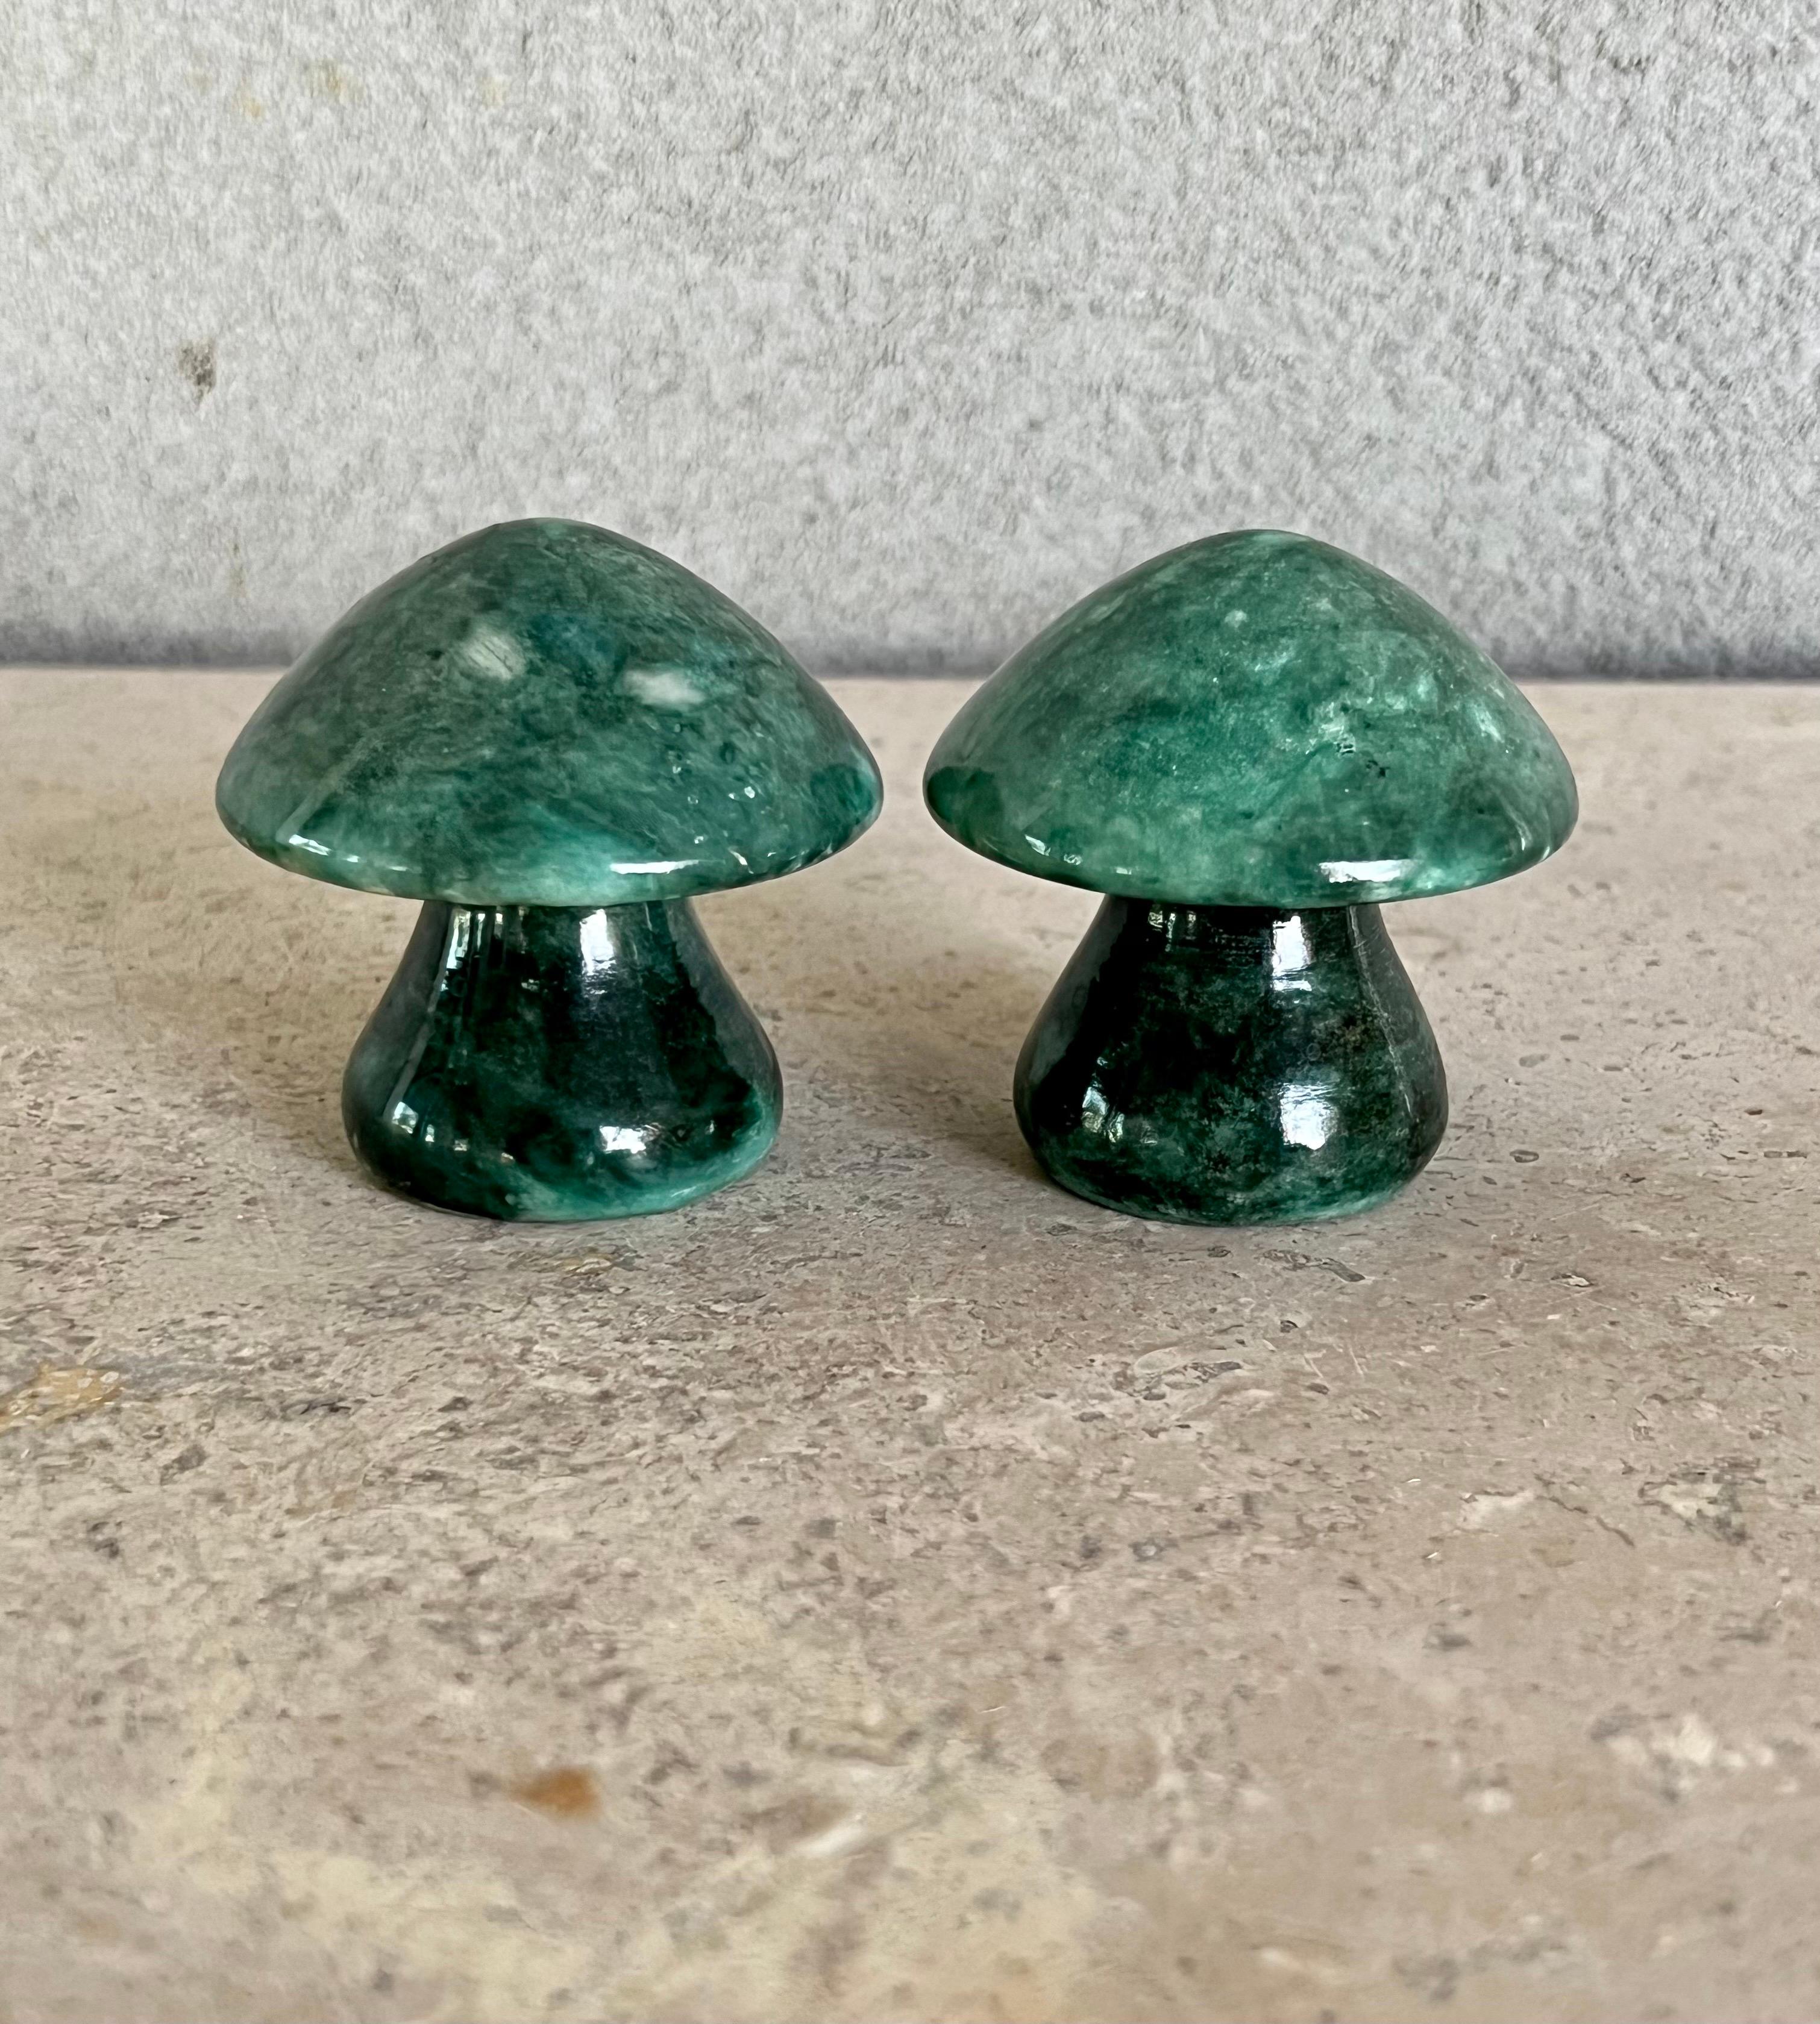 Beautiful pair of mid-century hand carved solid Alabaster mushrooms made in Italy, they have a deep polished green color, and a nice weight to them. Would be perfect as paperweights or to style a bookcase. Would also be a great Holiday gift for a